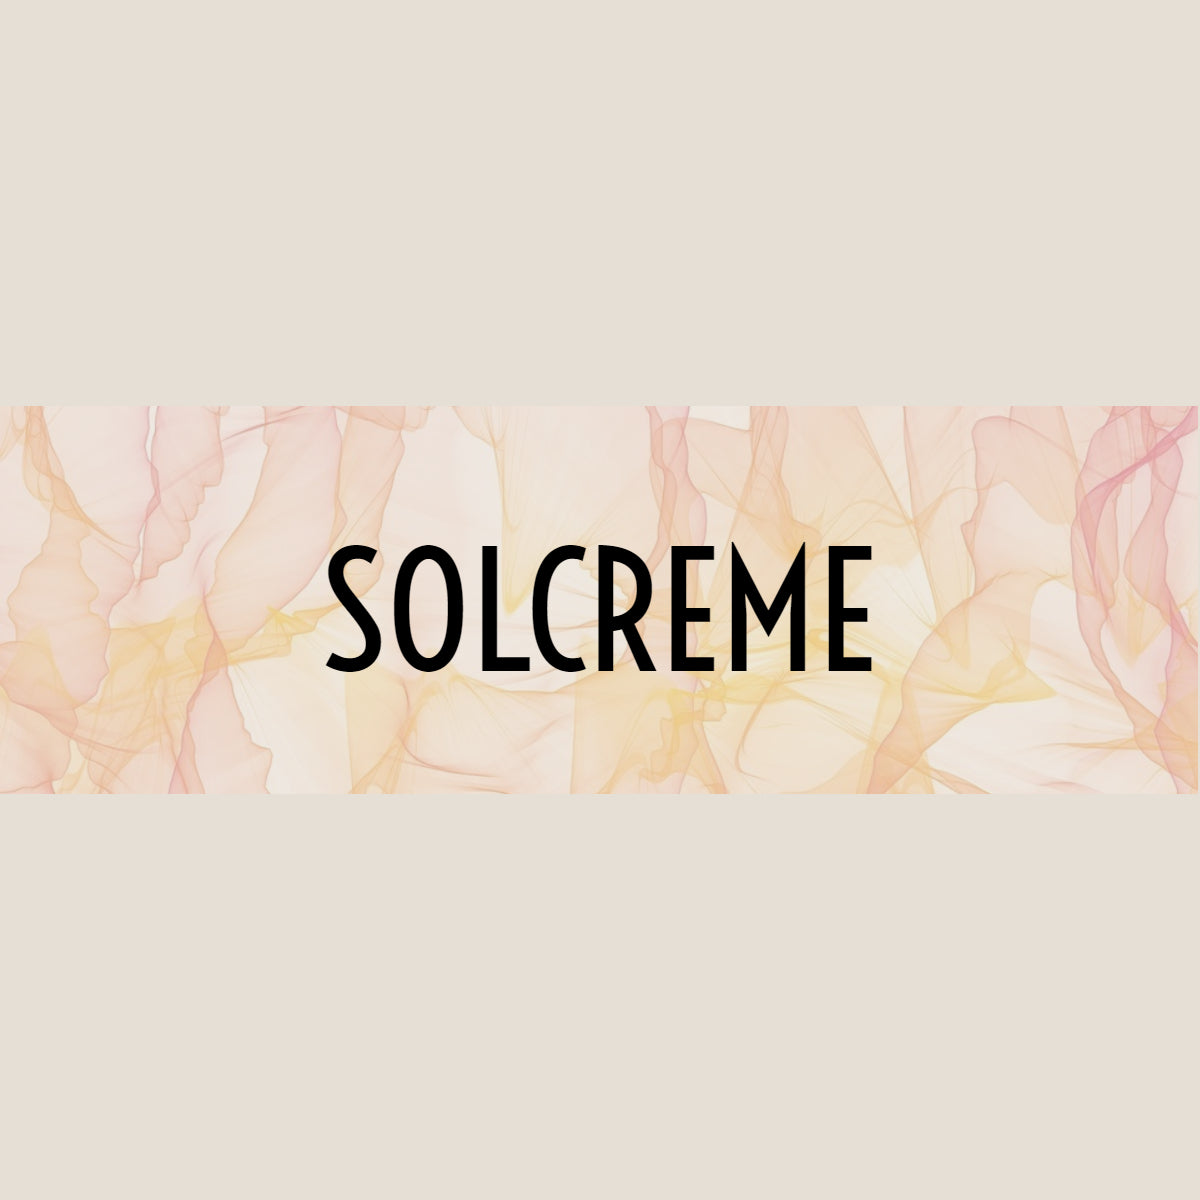 SOLCREME